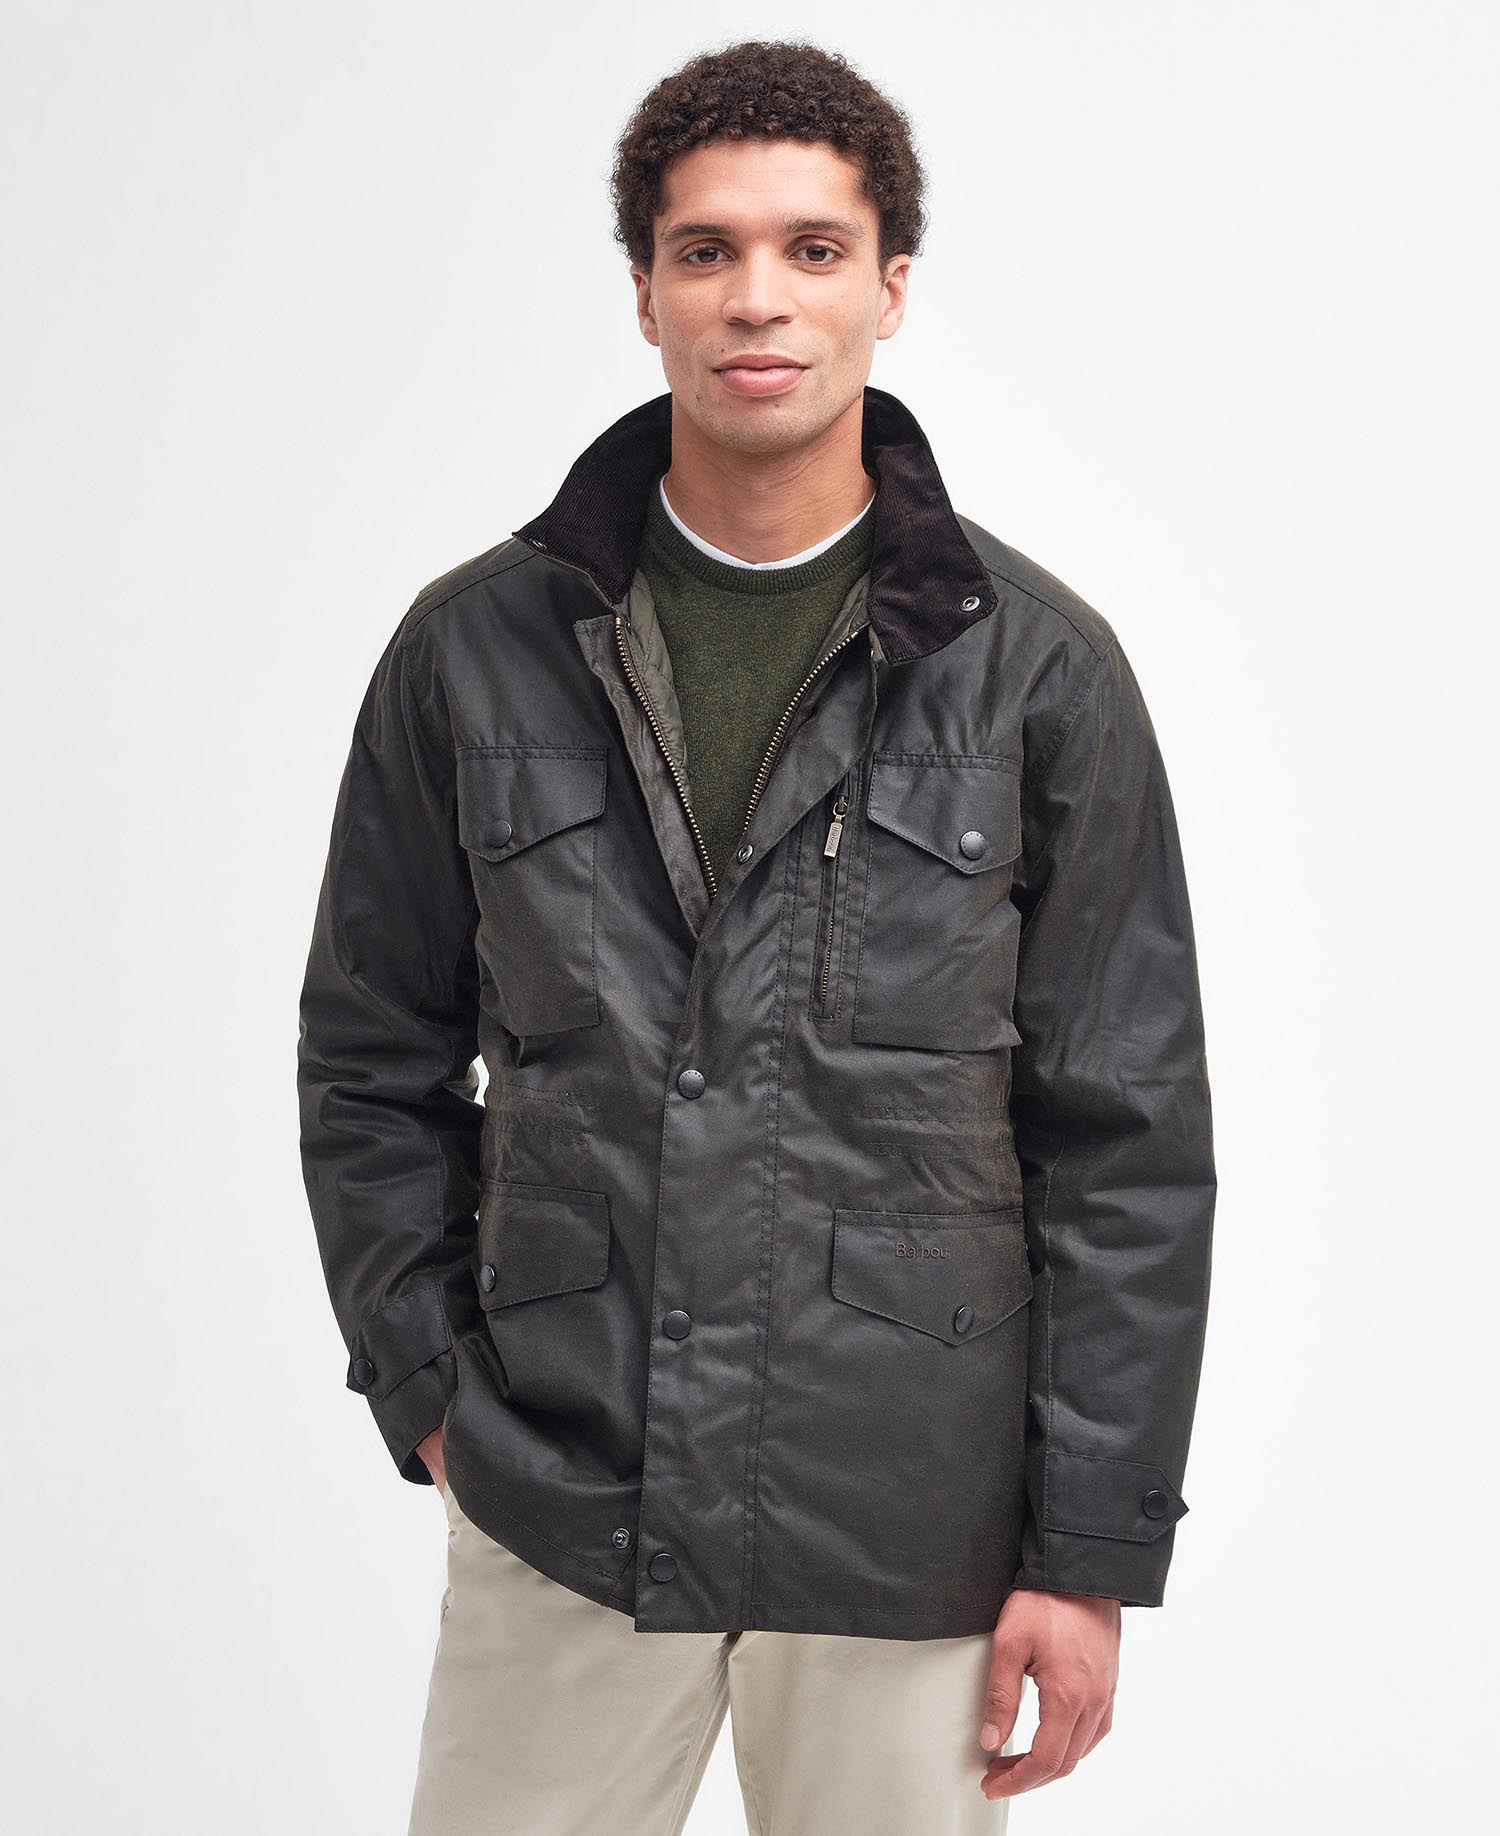 Barbour Sapper Wax Jacket in Olive | Barbour